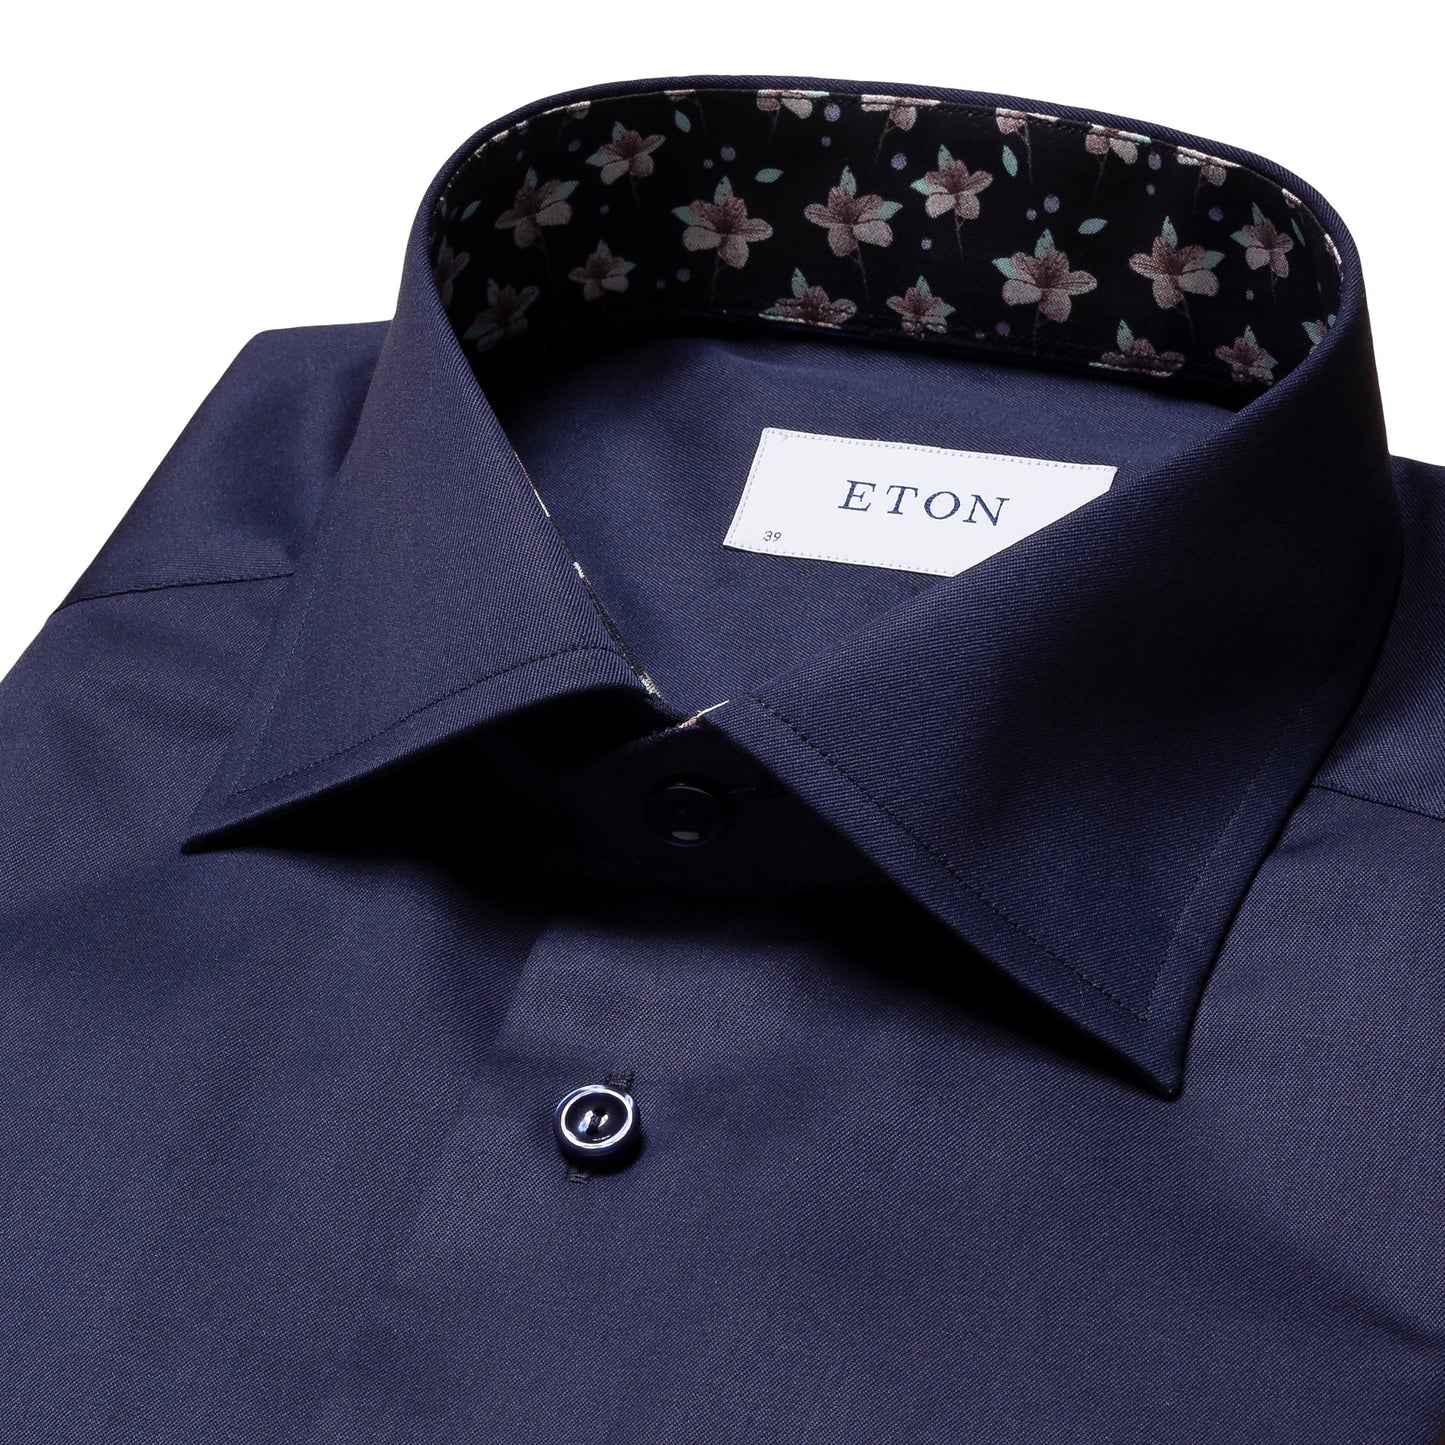 Eton Signature Twill Contemporary Fit Shirt Navy with Floral Print Trim 10000448529